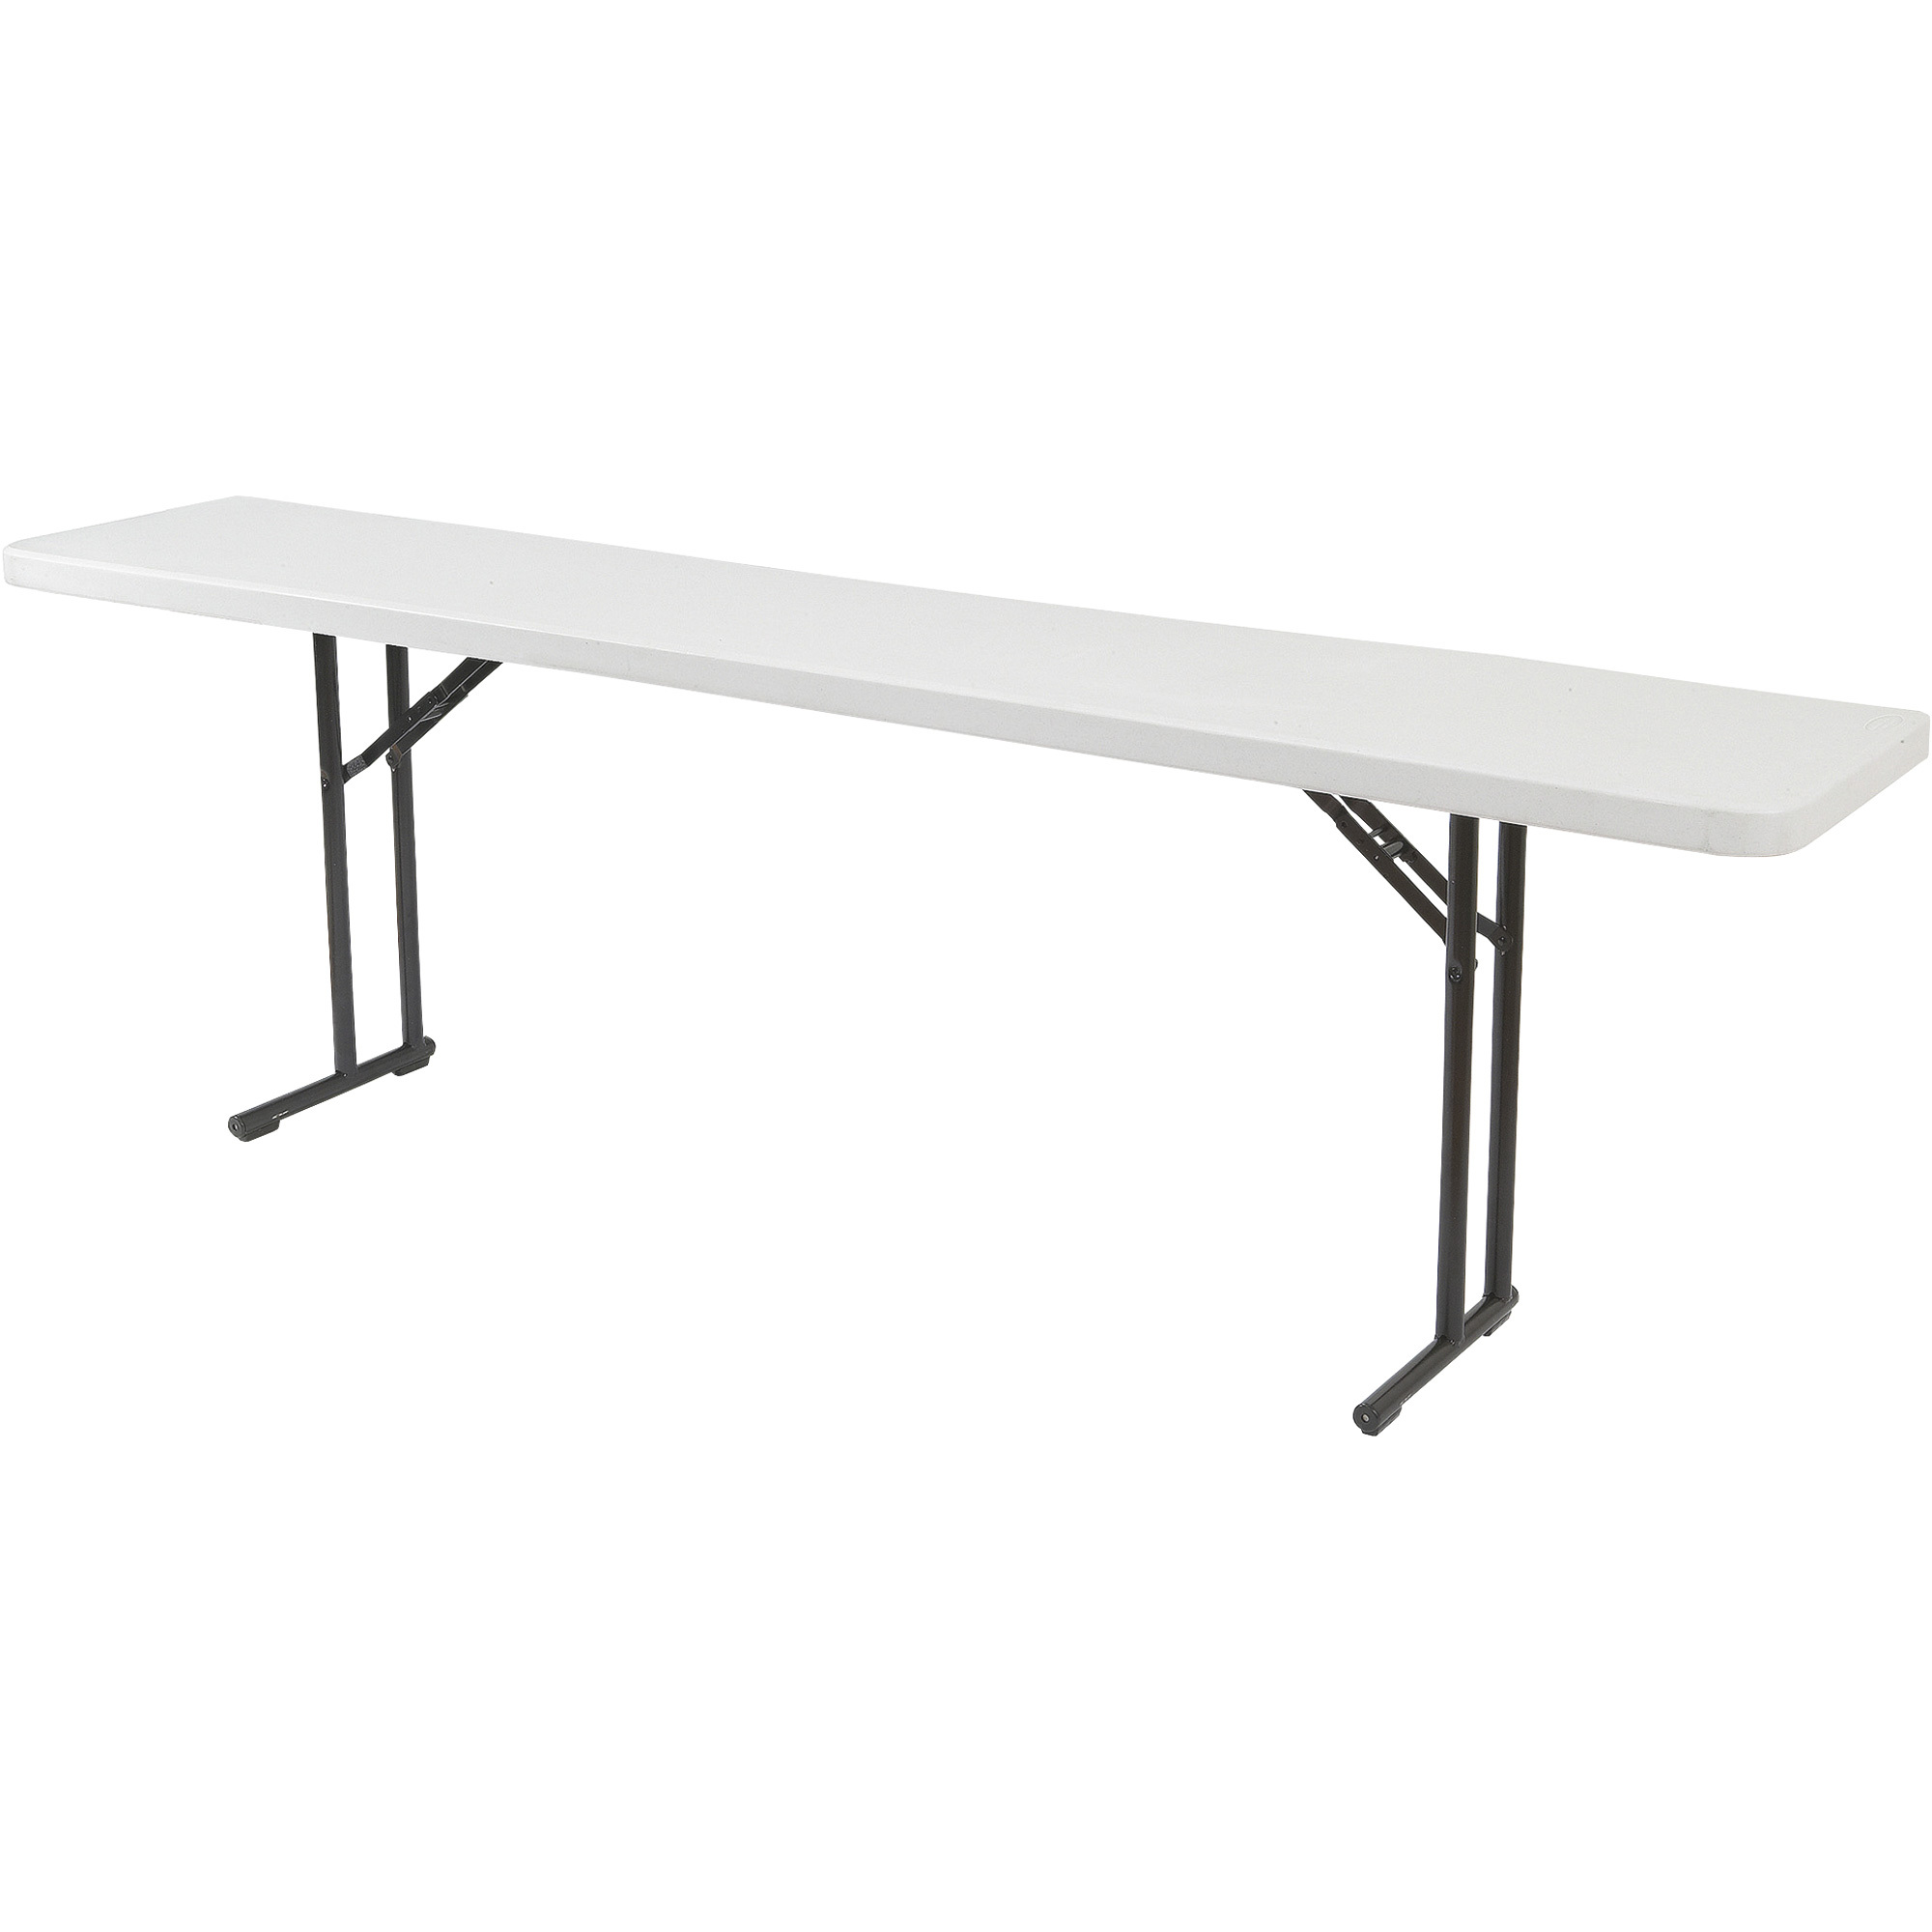 96Inch L x 18Inch W Folding Table — 10-Pack, Gray, Model - National Public Seating BT1896/10